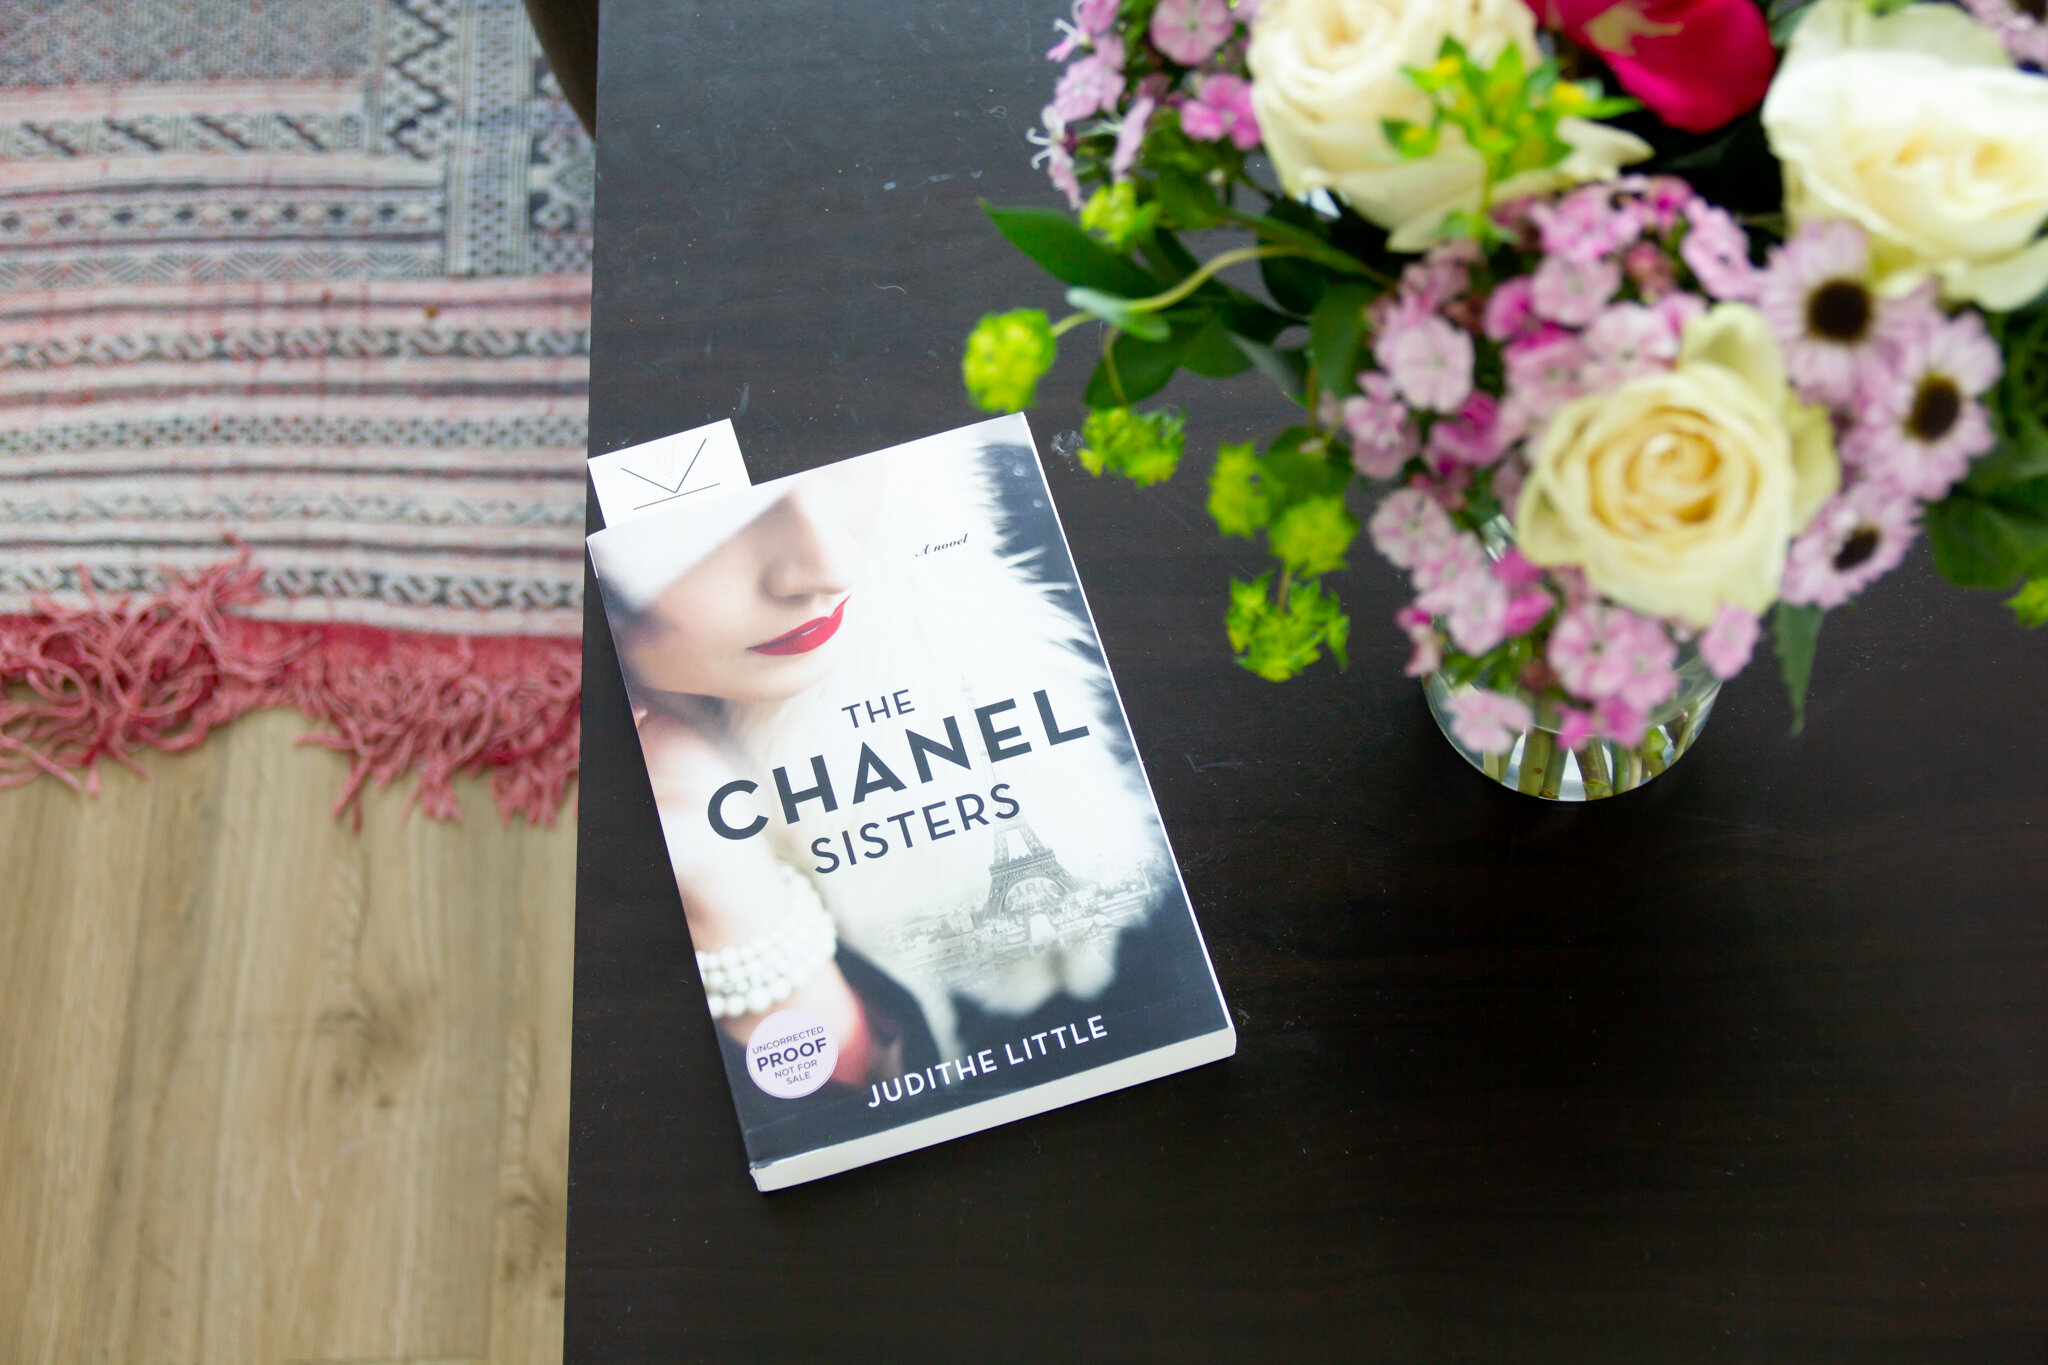 the chanel sisters by judith little